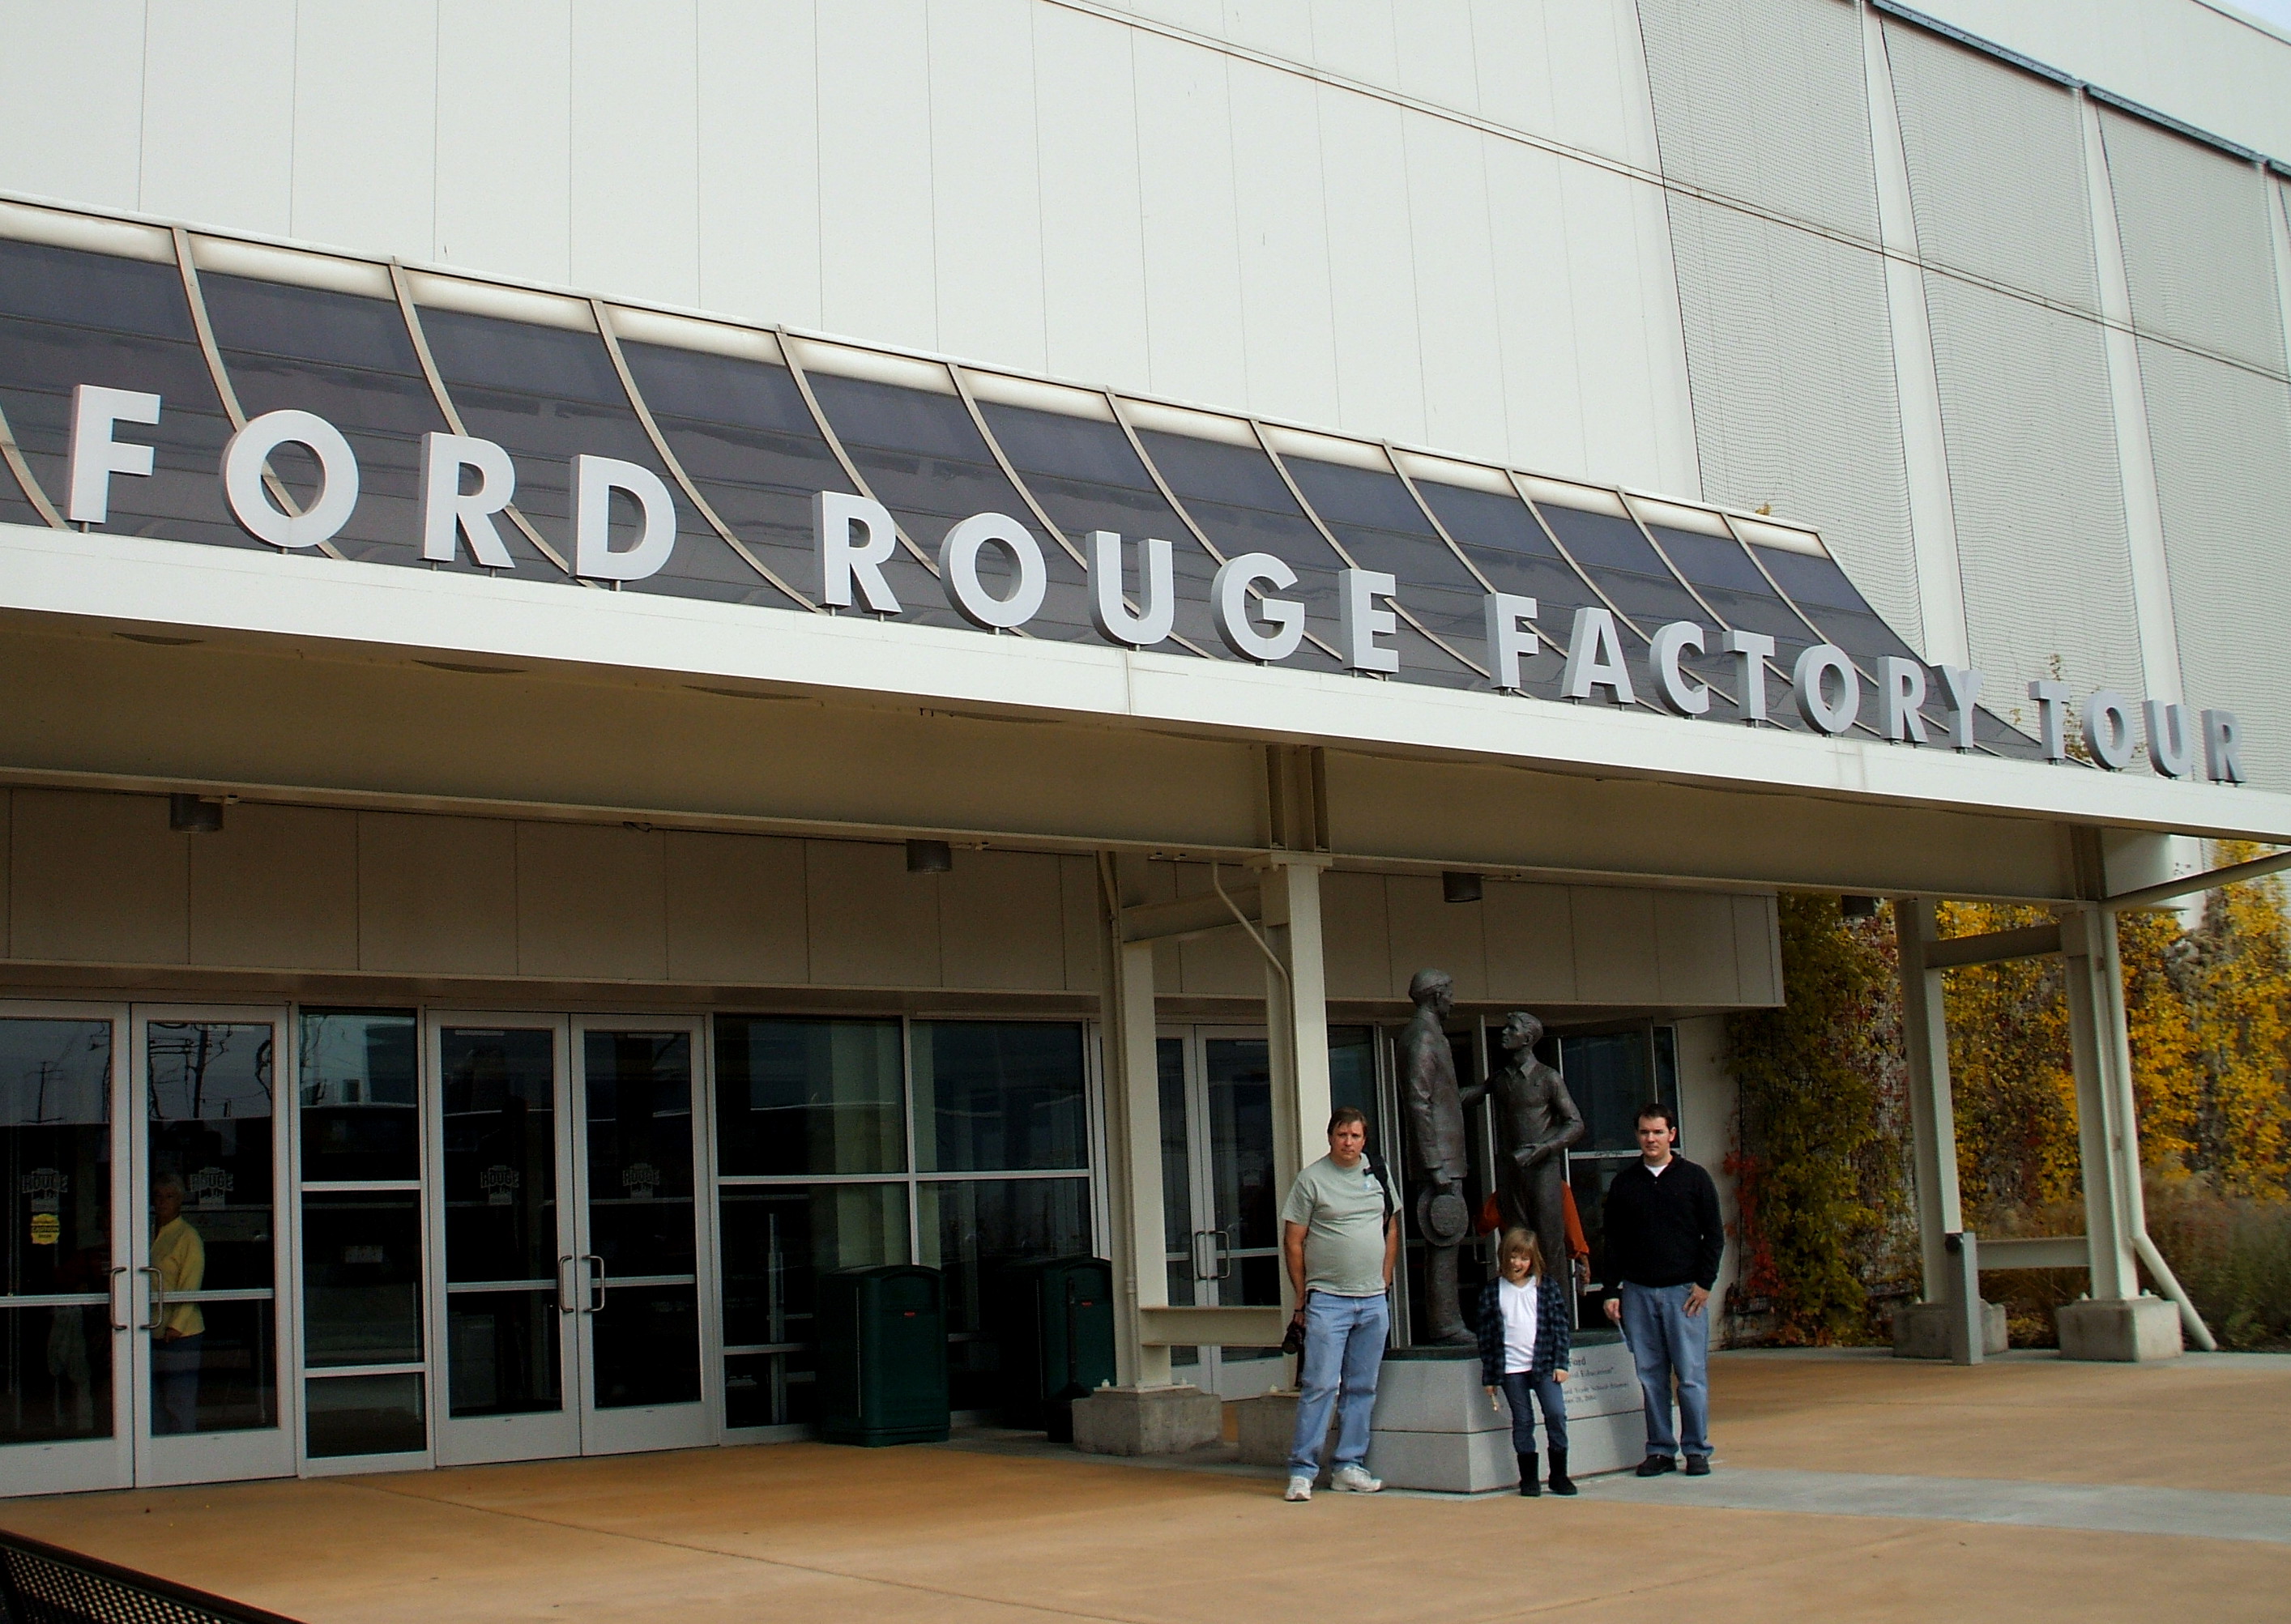 ford rouge factory tour address